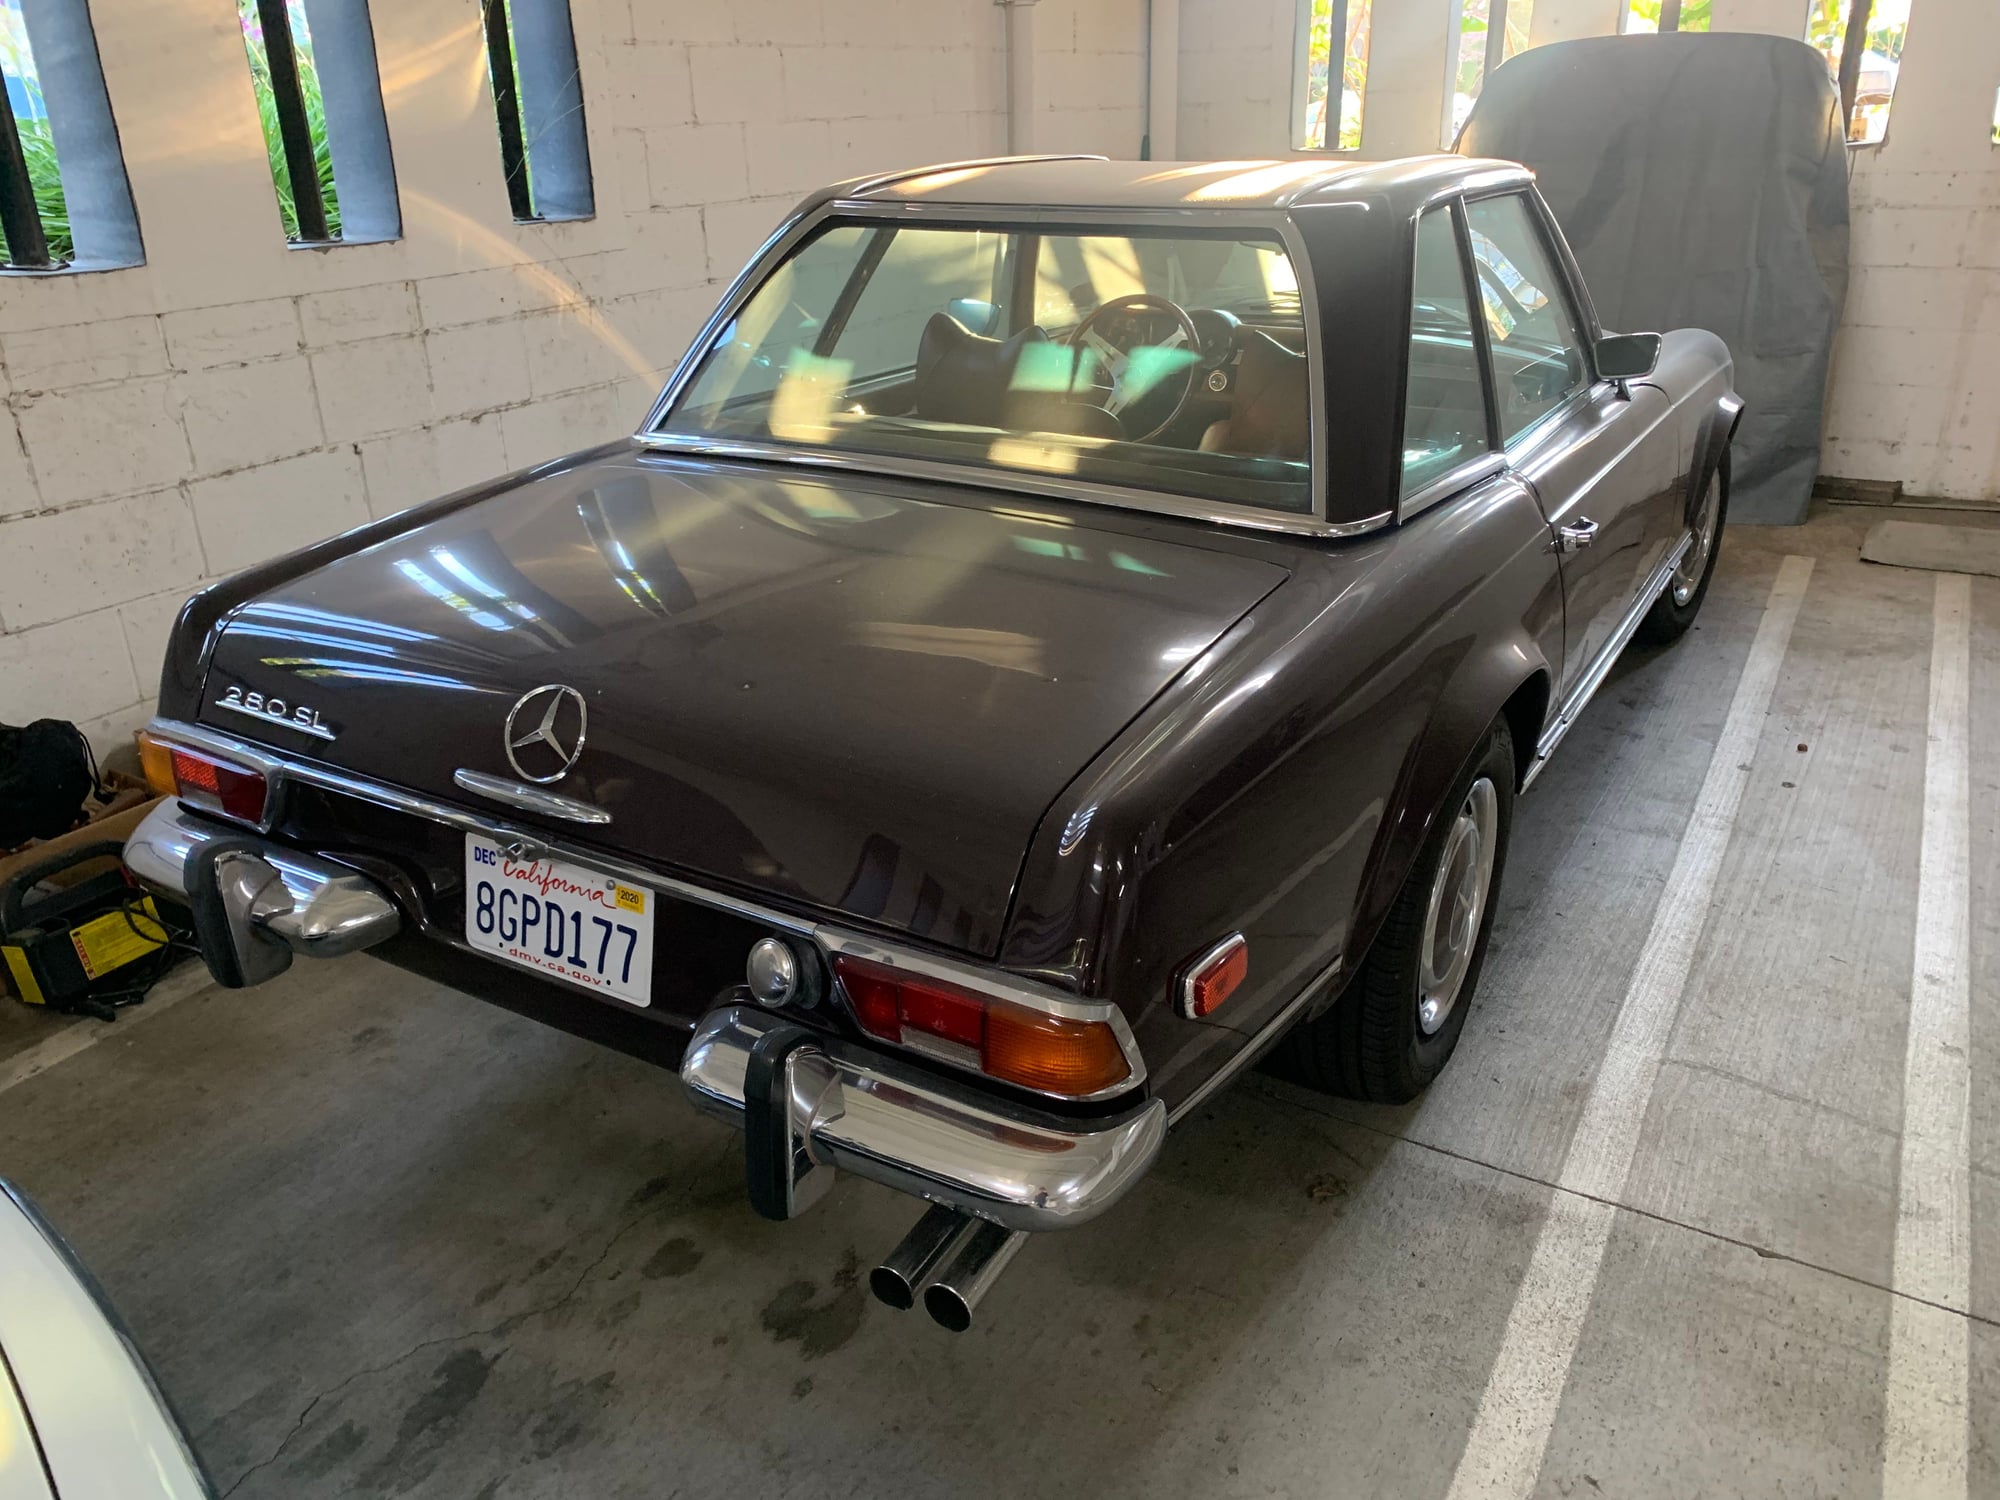 1971 Mercedes-Benz 280SL - Two 280SL drivers for the price of one! 1969 Euro & 1971 also 380sl 560sl - Used - VIN 11304412020560 - Los Angeles, CA 90069, United States